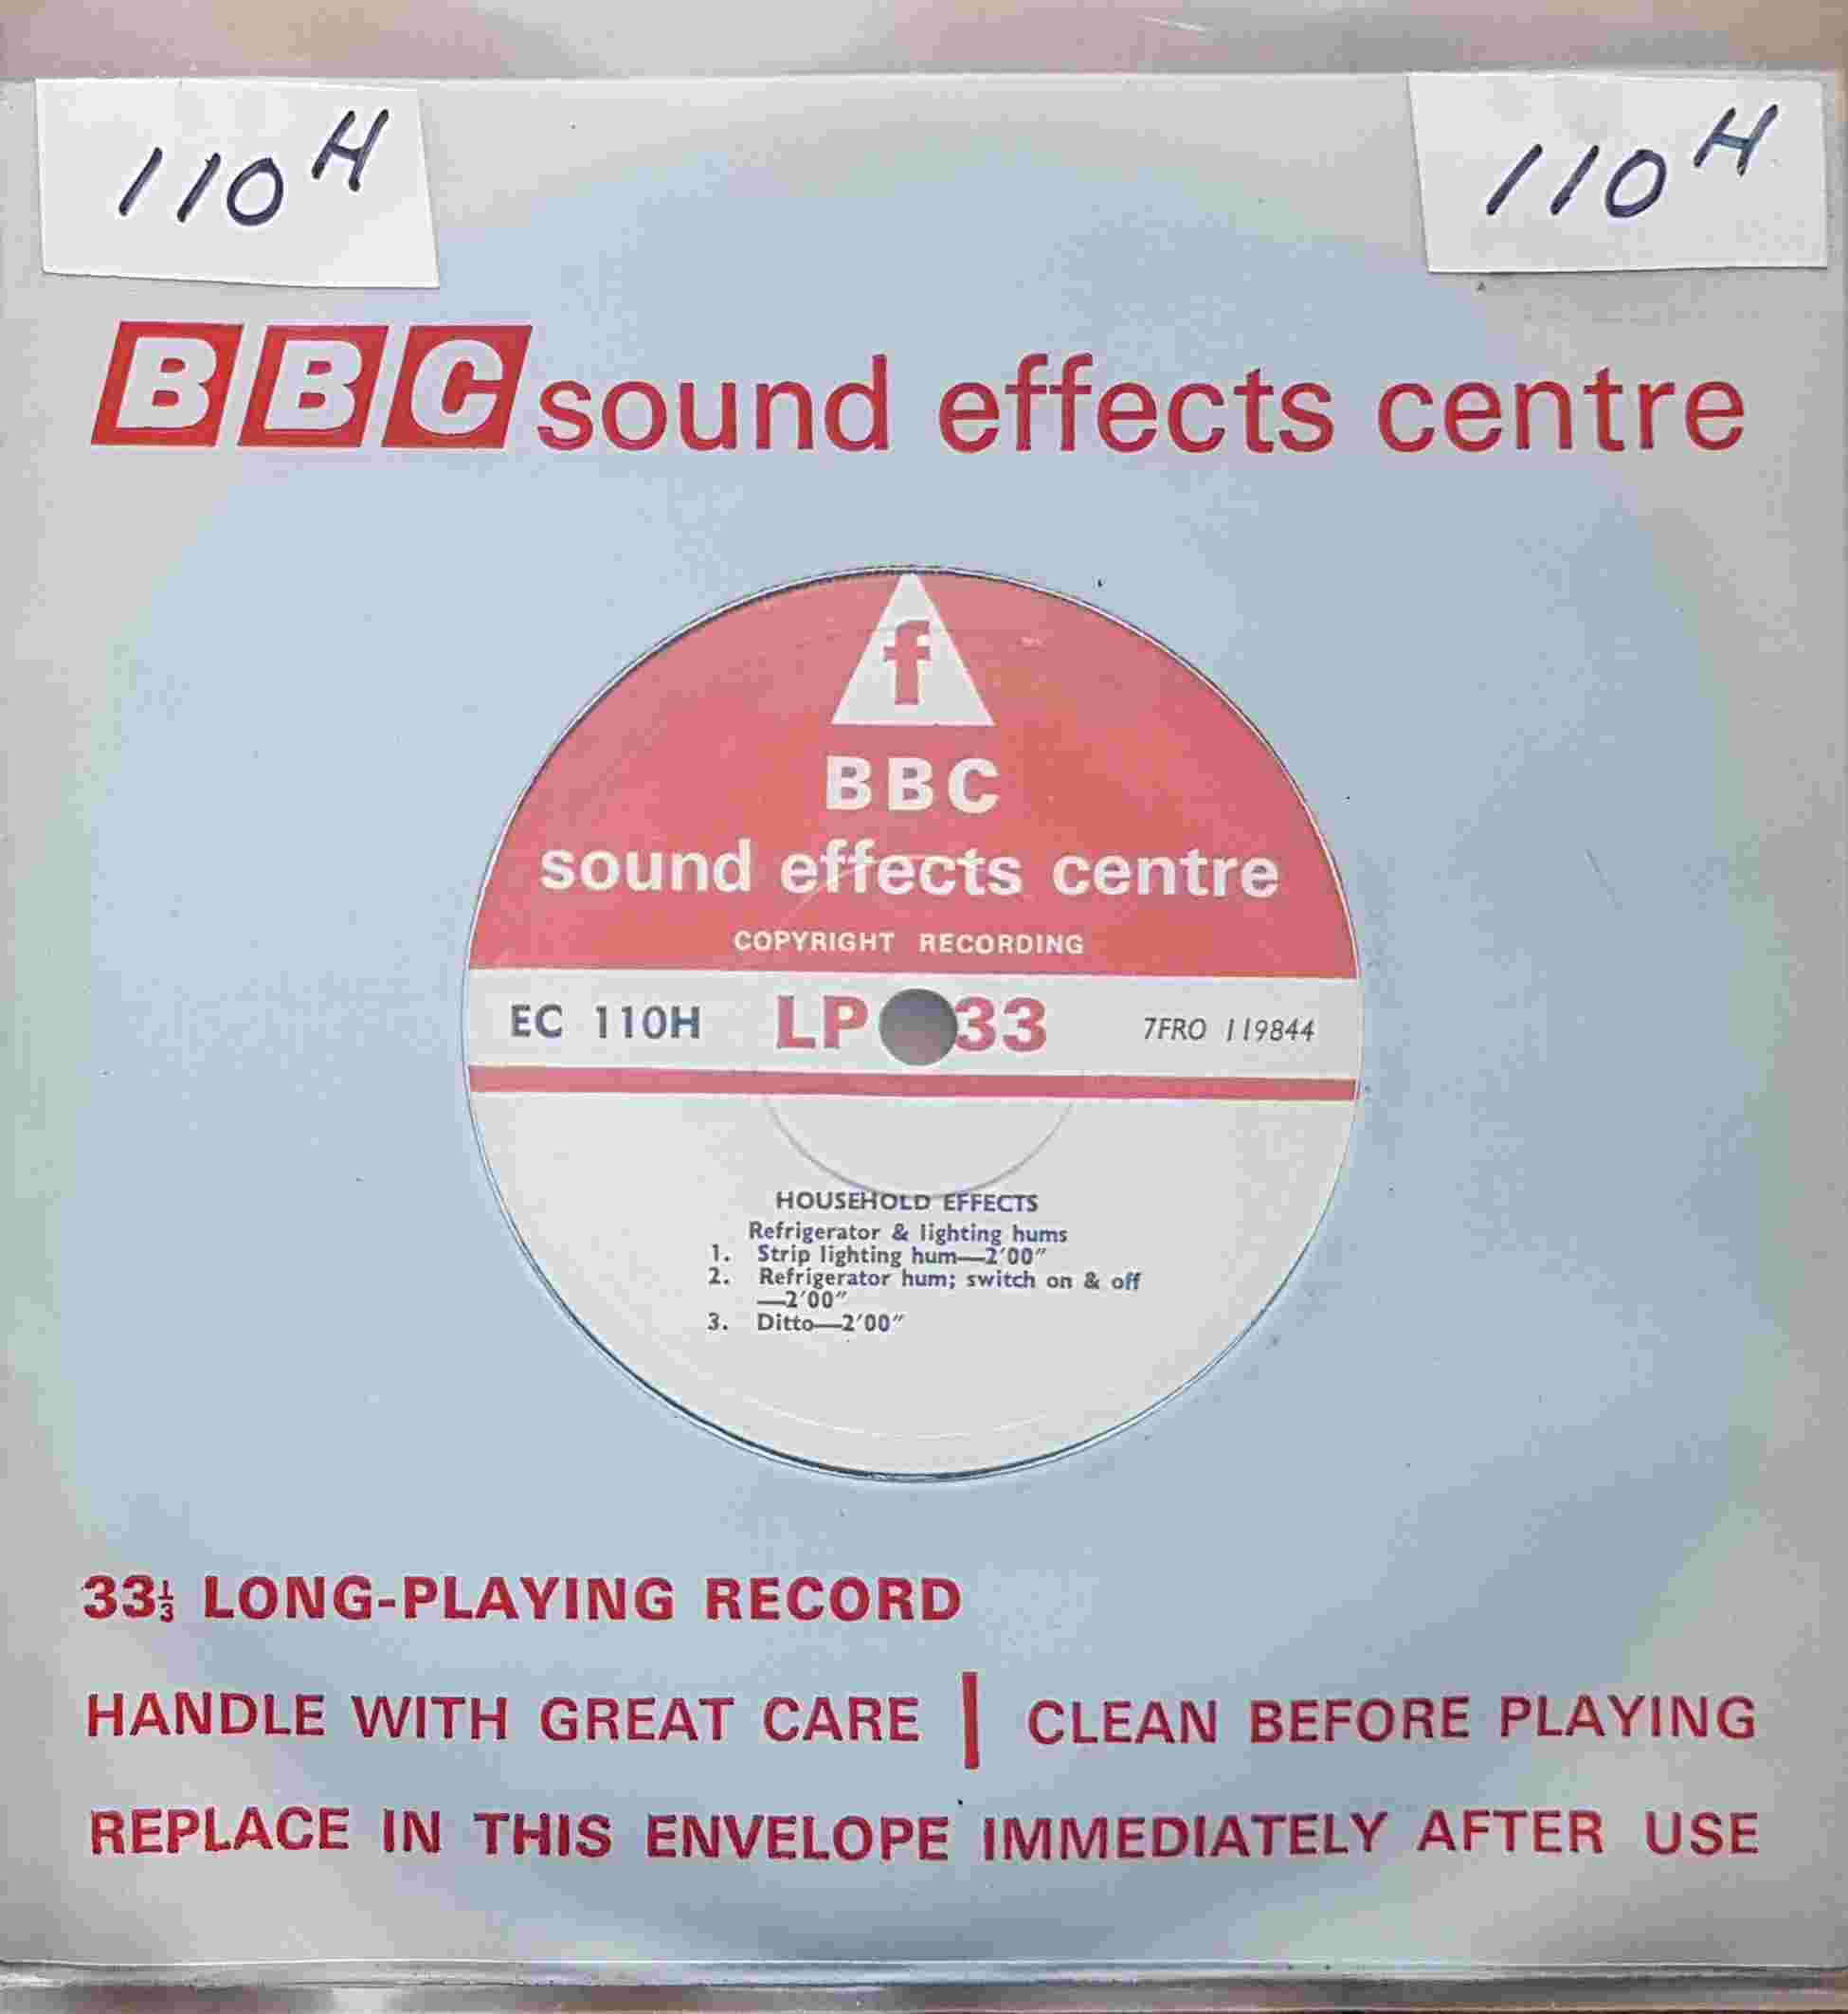 Picture of EC 110H Household effects - Refrigerator & lighting hums by artist Not registered from the BBC records and Tapes library